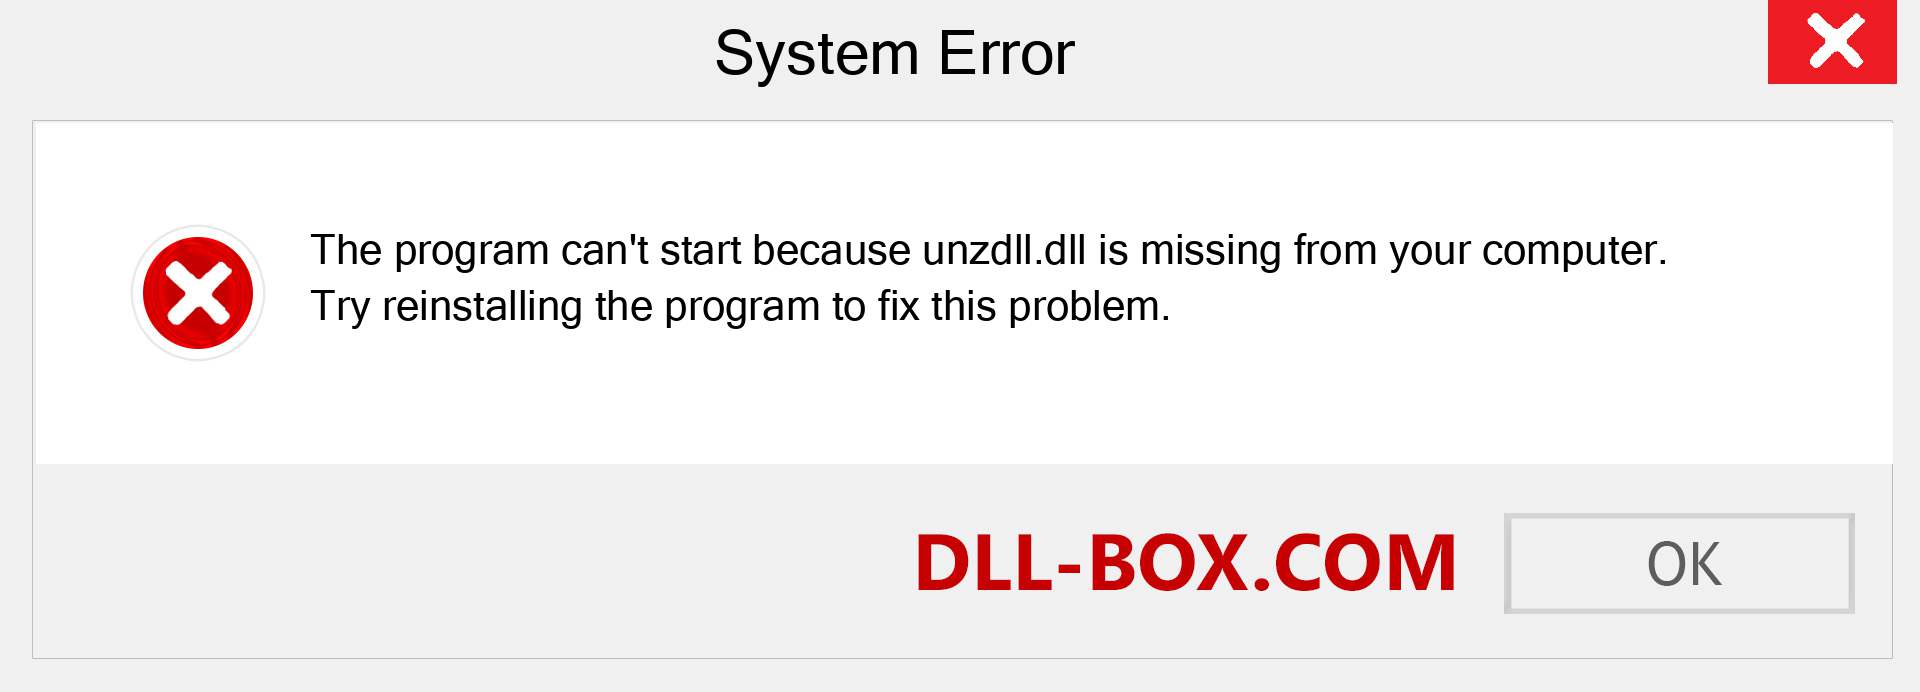  unzdll.dll file is missing?. Download for Windows 7, 8, 10 - Fix  unzdll dll Missing Error on Windows, photos, images